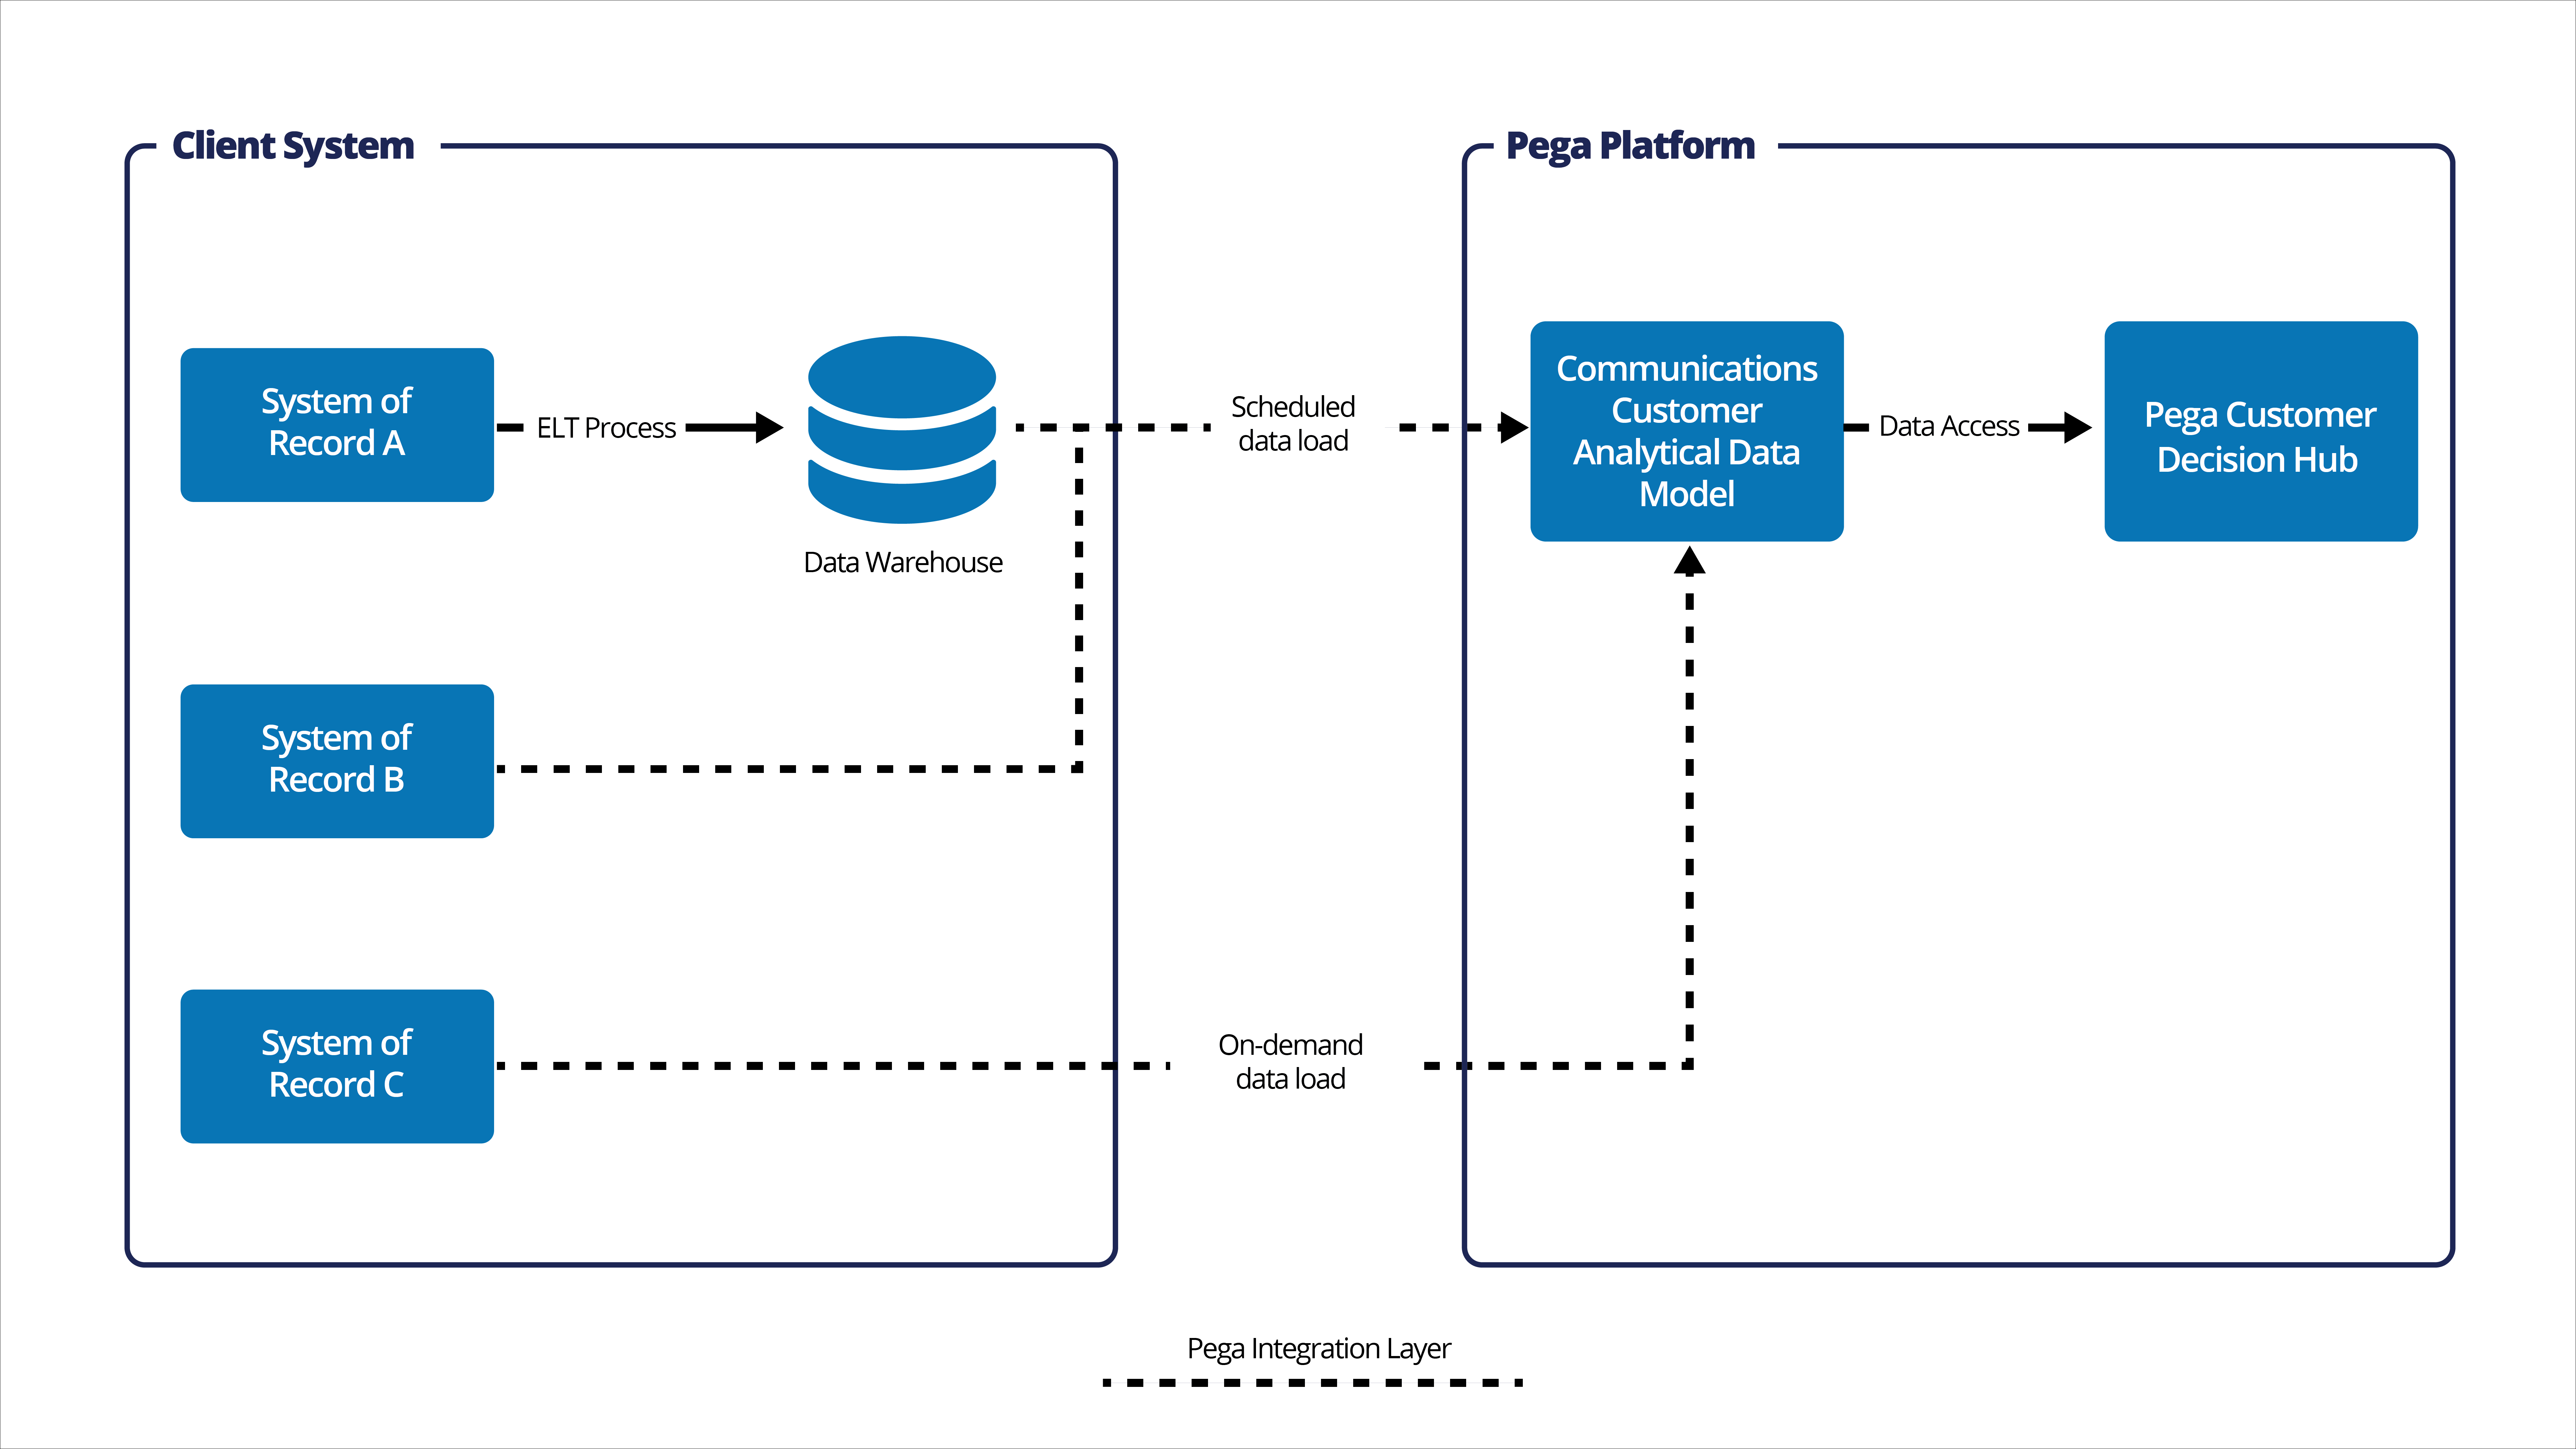 Integration data layer of a Pega Customer Decision Hub implementation for
                    communications